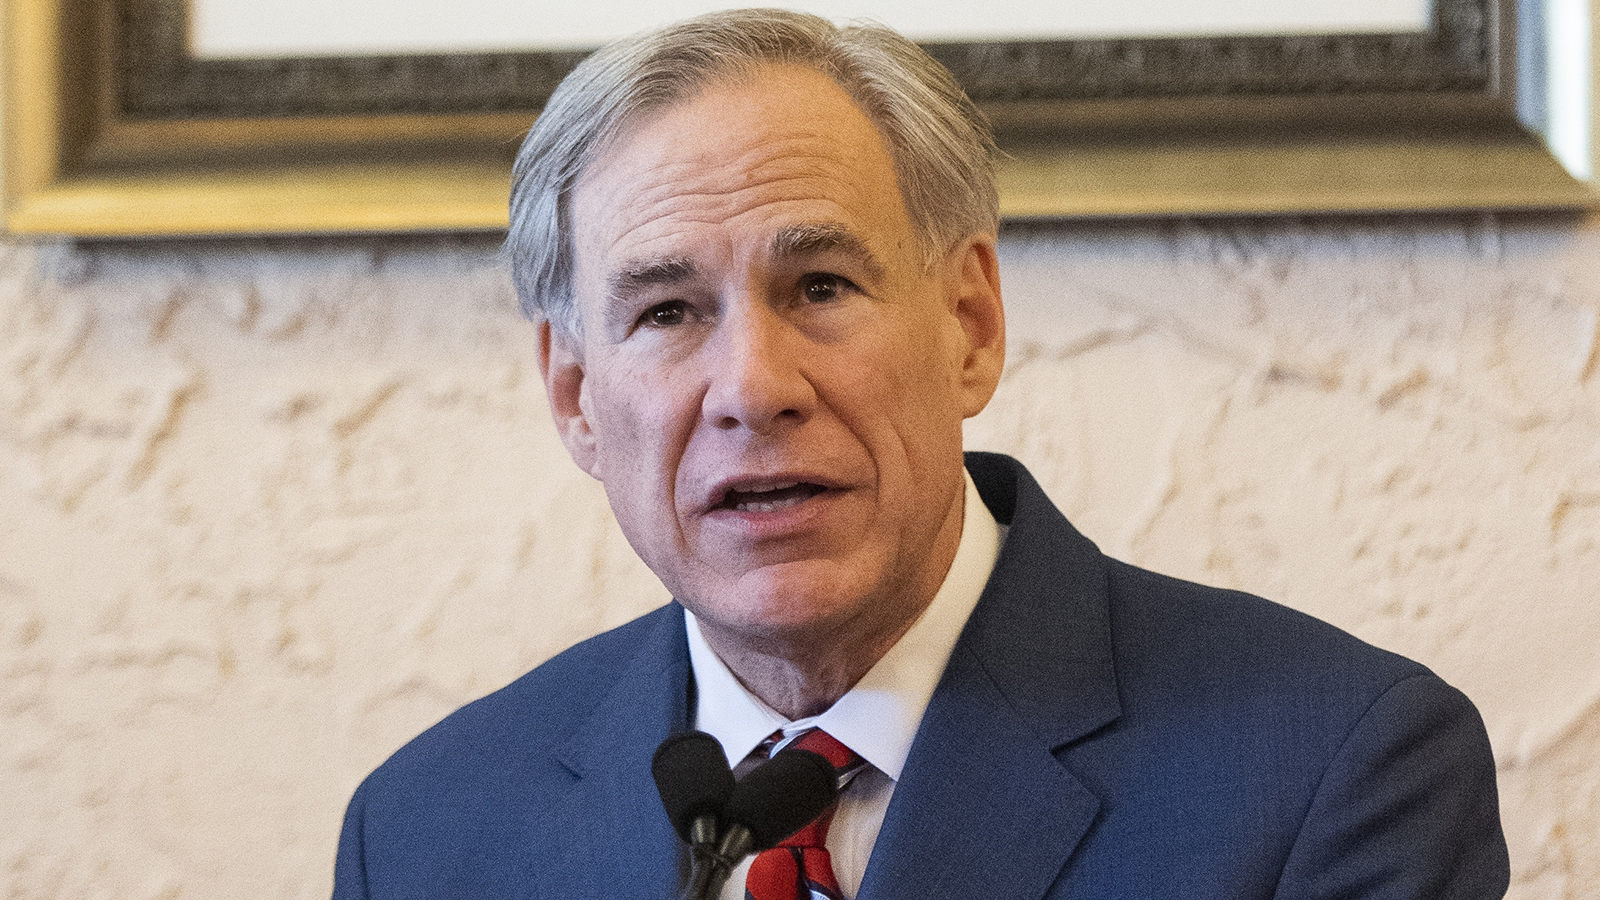 Texas Governor Greg Abbott delivers an announcement in Montelongo's Mexican Restaurant on Tuesday, March 2, in Lubbock, Texas.